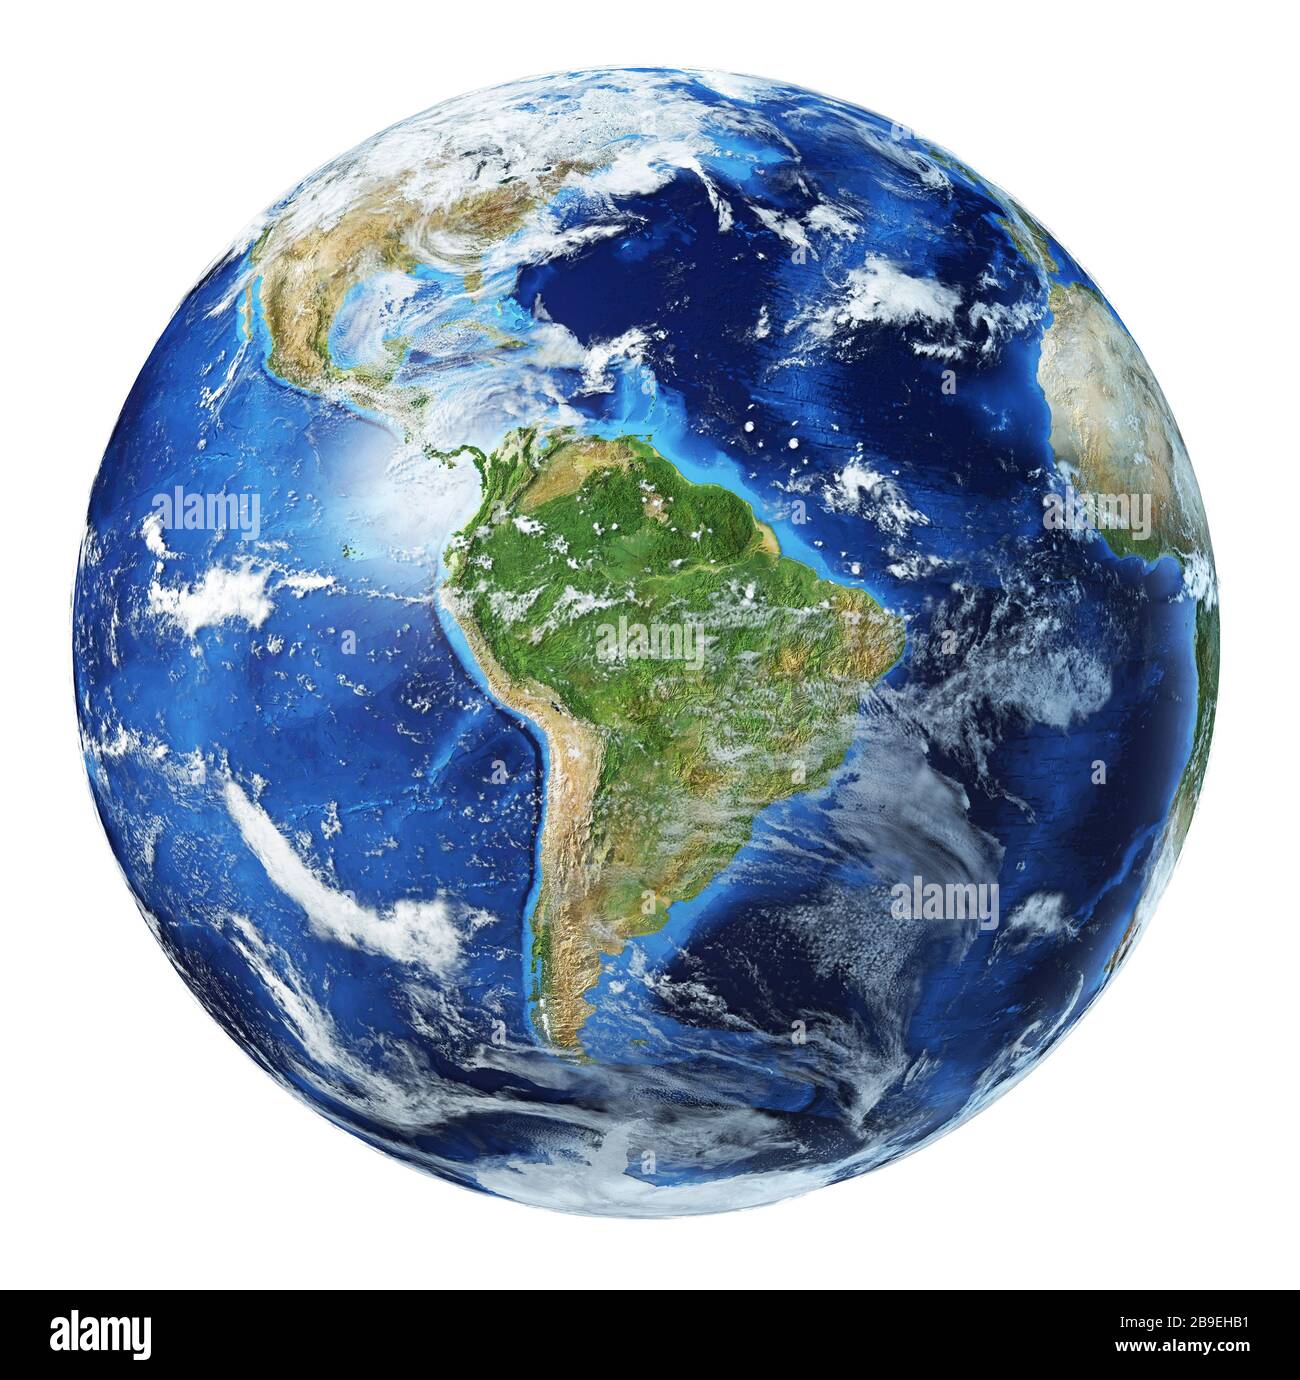 3D illustration of planet Earth, centered on South America. Stock Photo